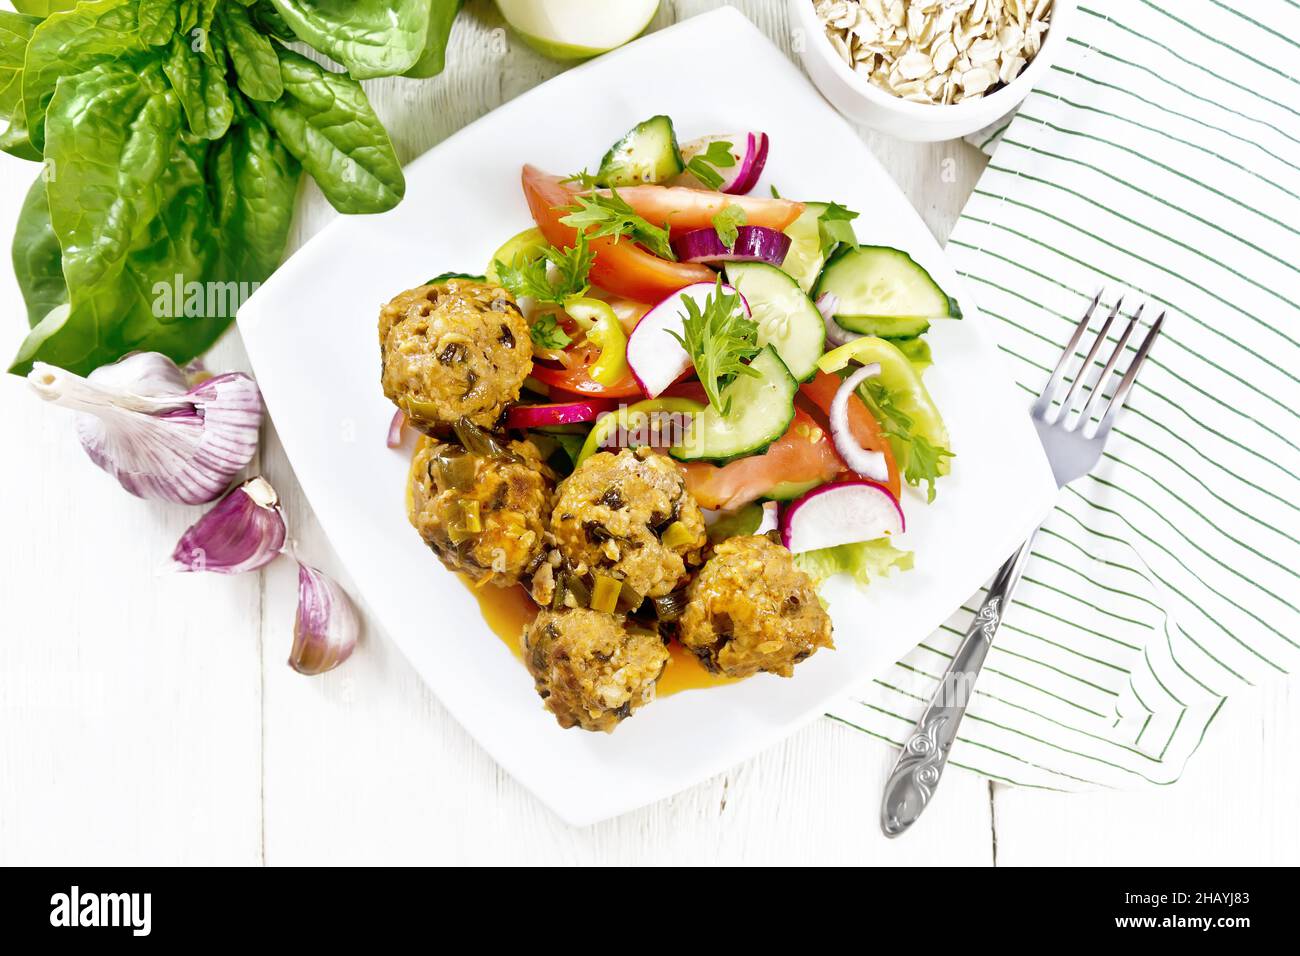 Minced meatballs with spinach, oatmeal and green onions in tomato sauce, vegetable salad in a plate, napkin on wooden board background from above Stock Photo